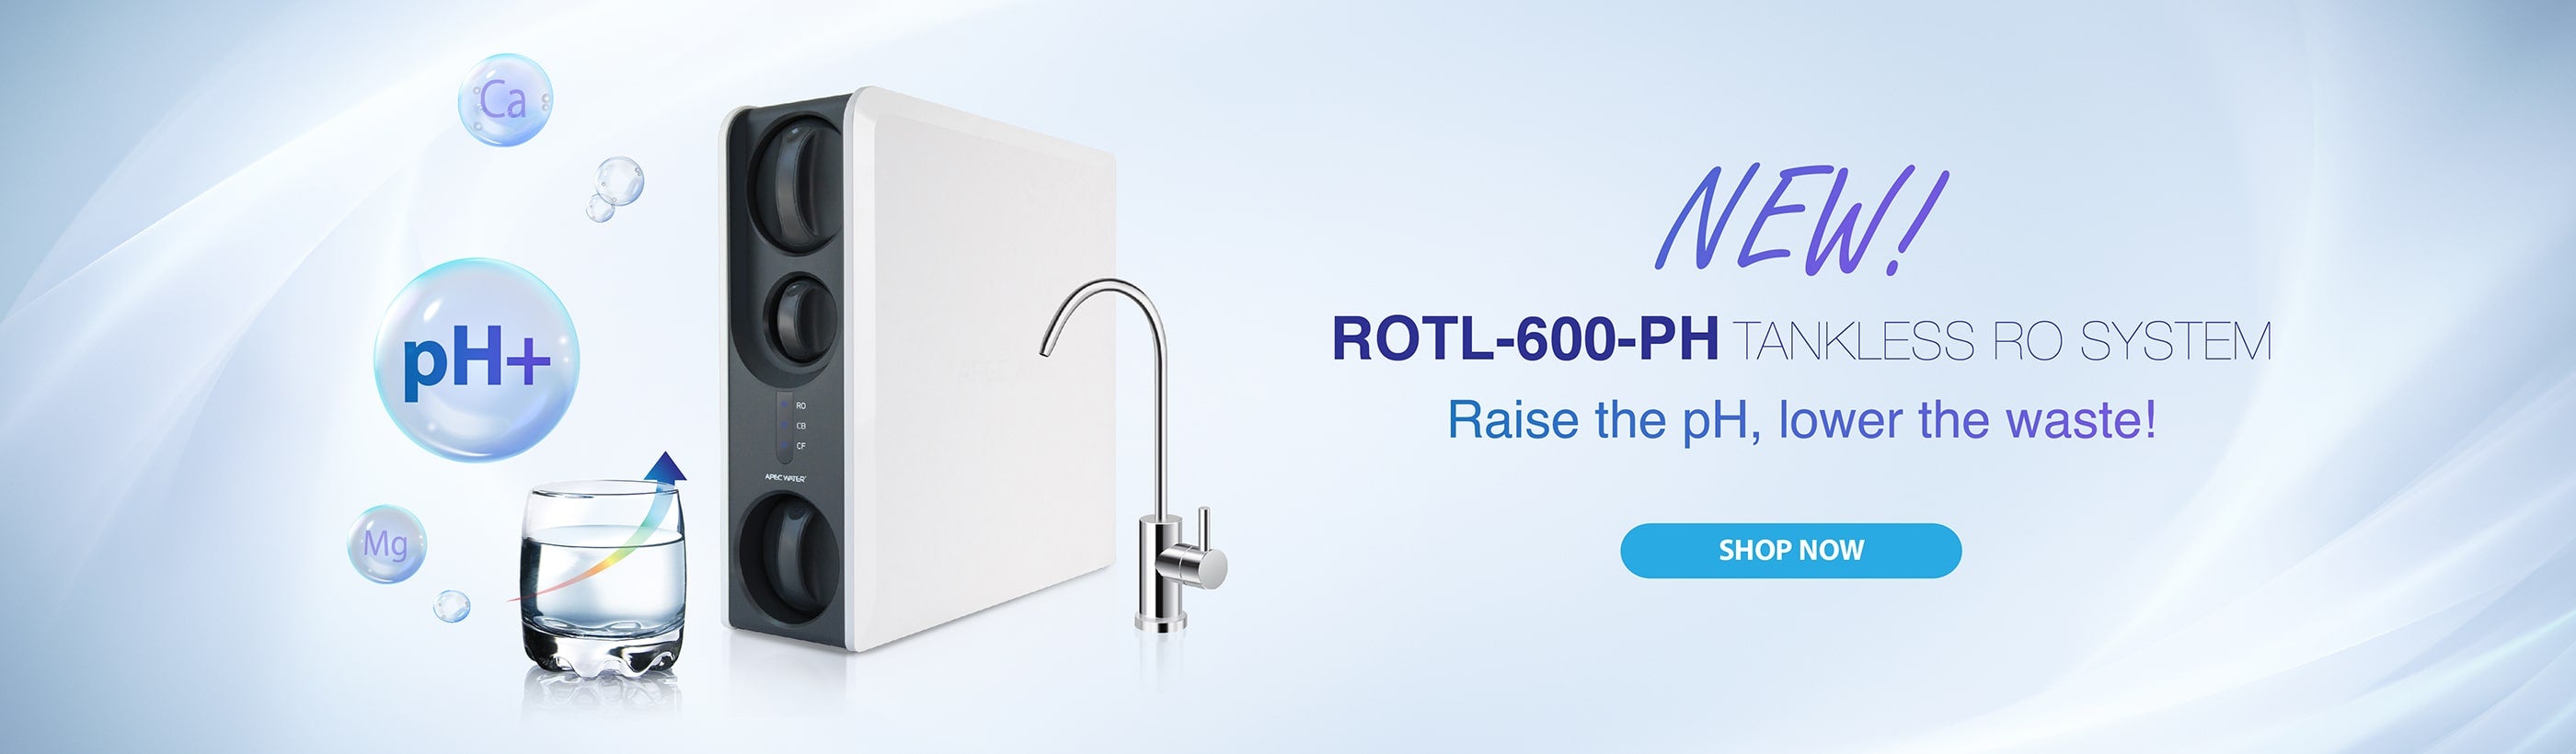 APEC Water new tankless reverse osmosis water filter homepage banner